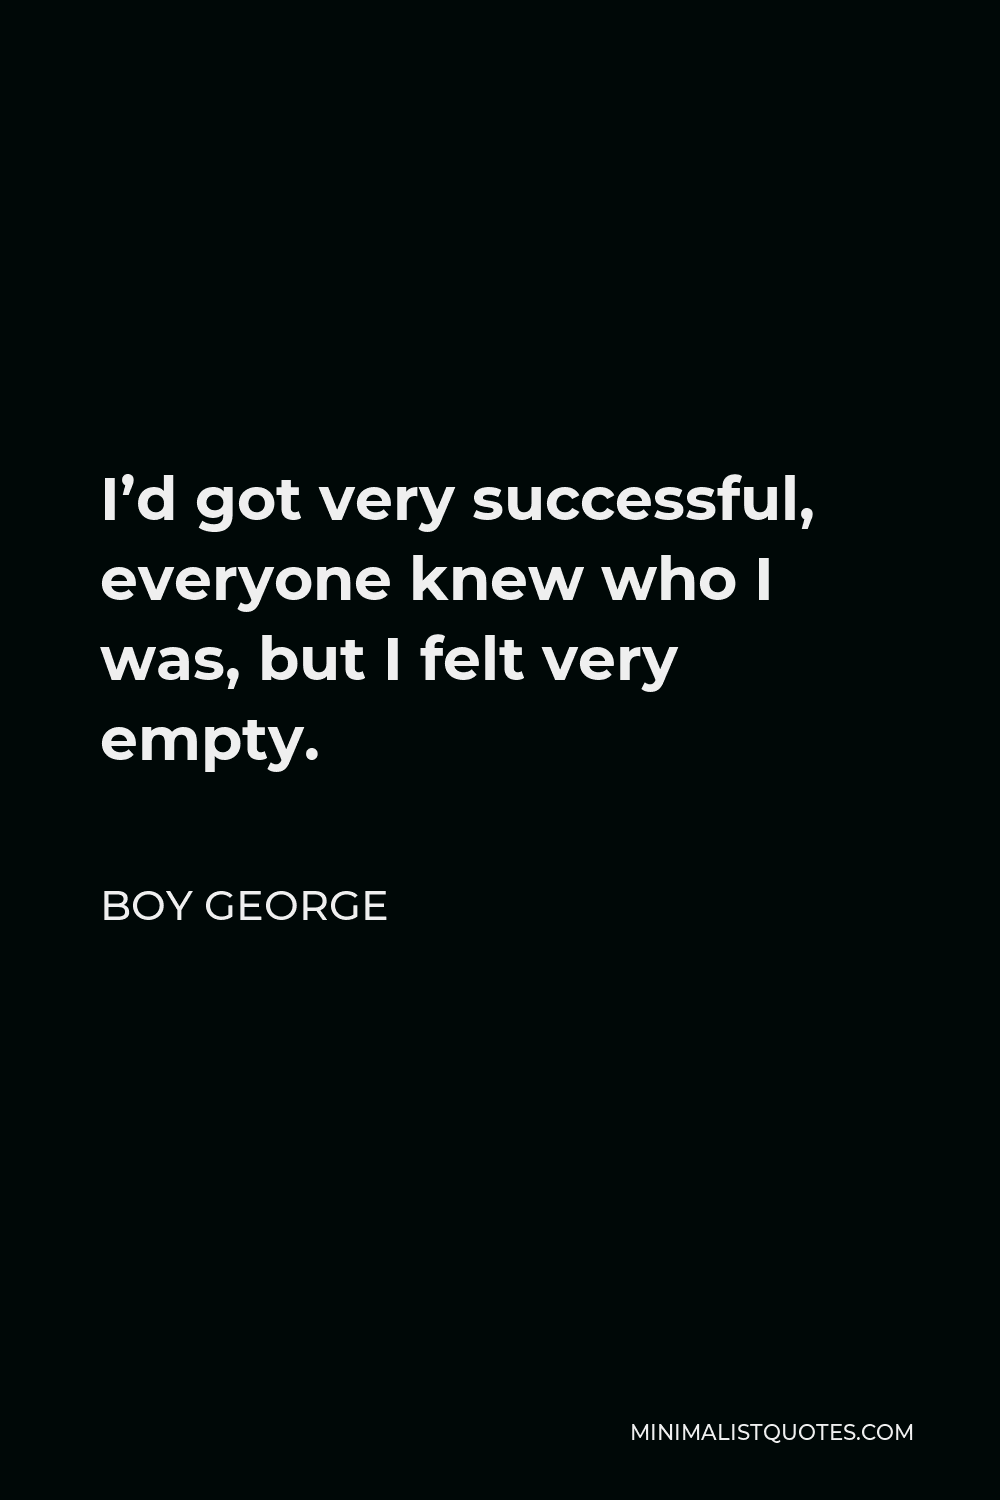 Boy George Quote - I’d got very successful, everyone knew who I was, but I felt very empty.